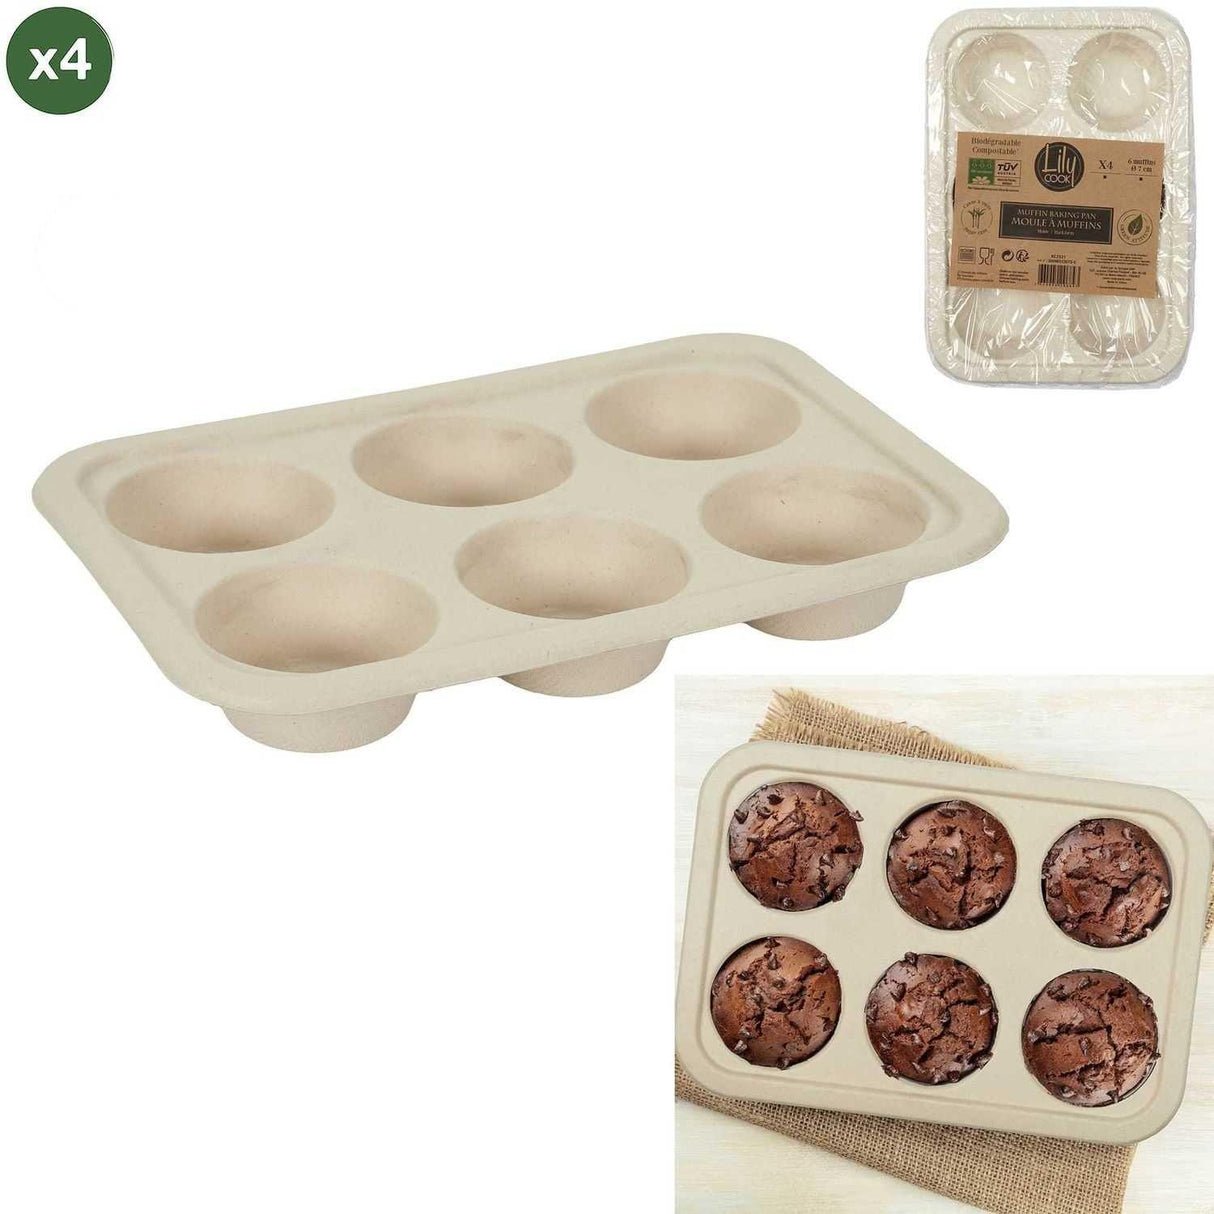 LILY COOK - MOULE CUISSON CANNE A SUCRE MUFFIN X4 - STOCK4U GROUP